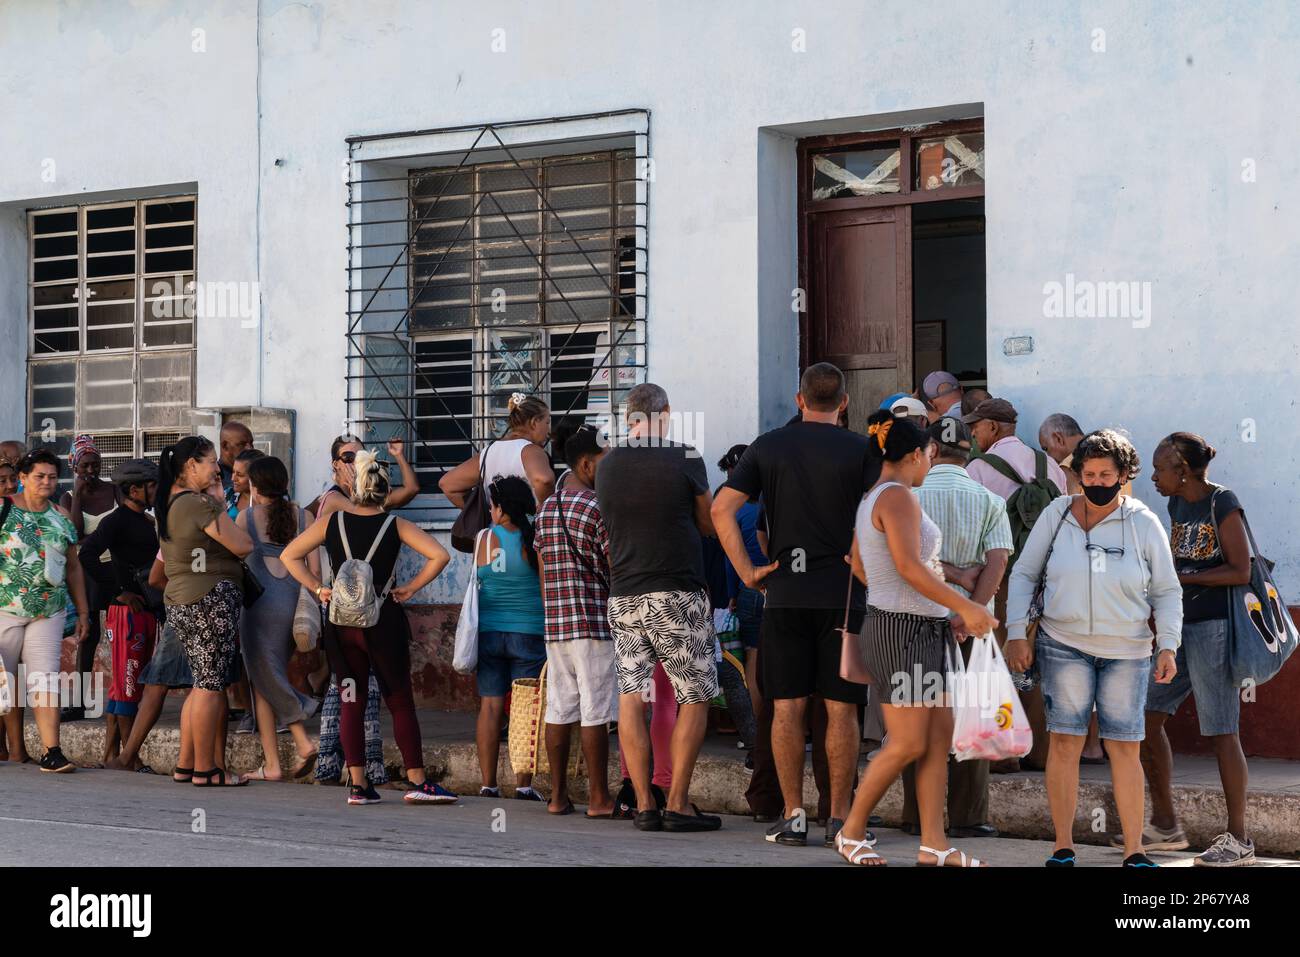 Queueing for both food and many services is a way of life because of shortages, Trinidad, Cuba, West Indies, Caribbean, Central America Stock Photo